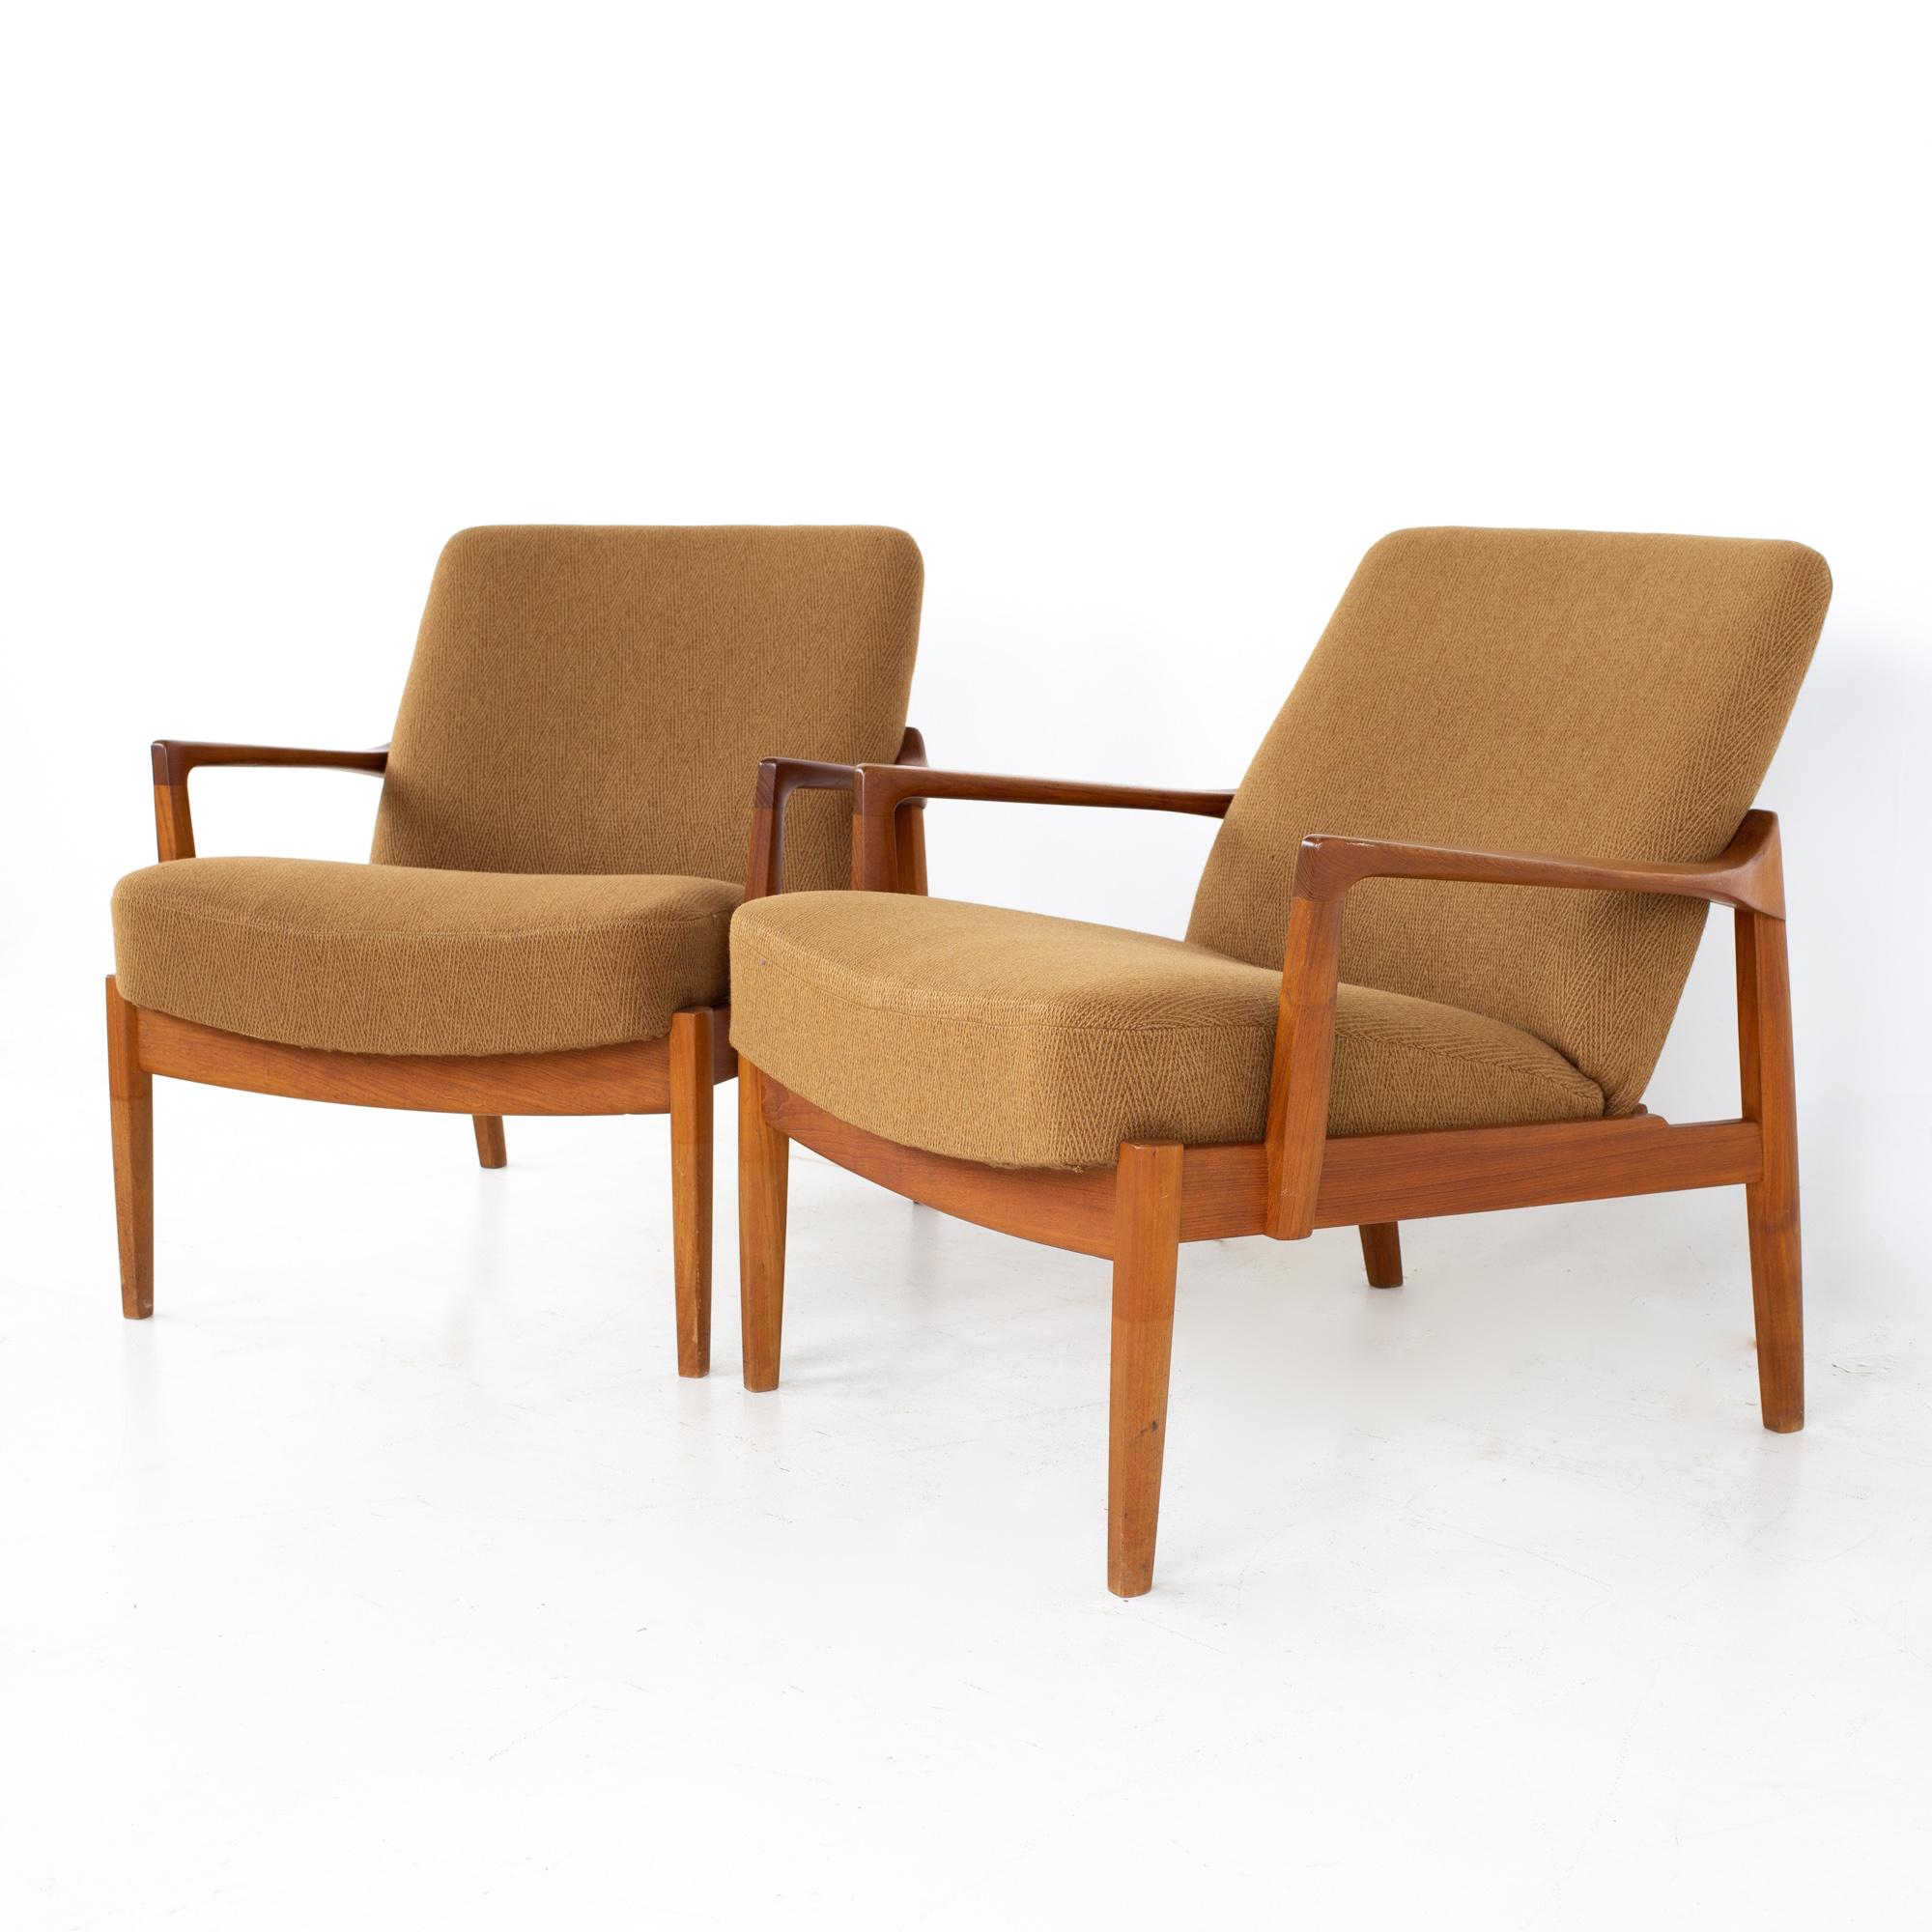 Tove and Edvard Kindt-Larsen for John Stuart France and Sons mid century Danish teak lounge chairs - a pair.
Each chair measures: 30 wide x 29 deep x 30 high, with a seat height of 18 inches and arm height of 21.5 inches

All pieces of furniture